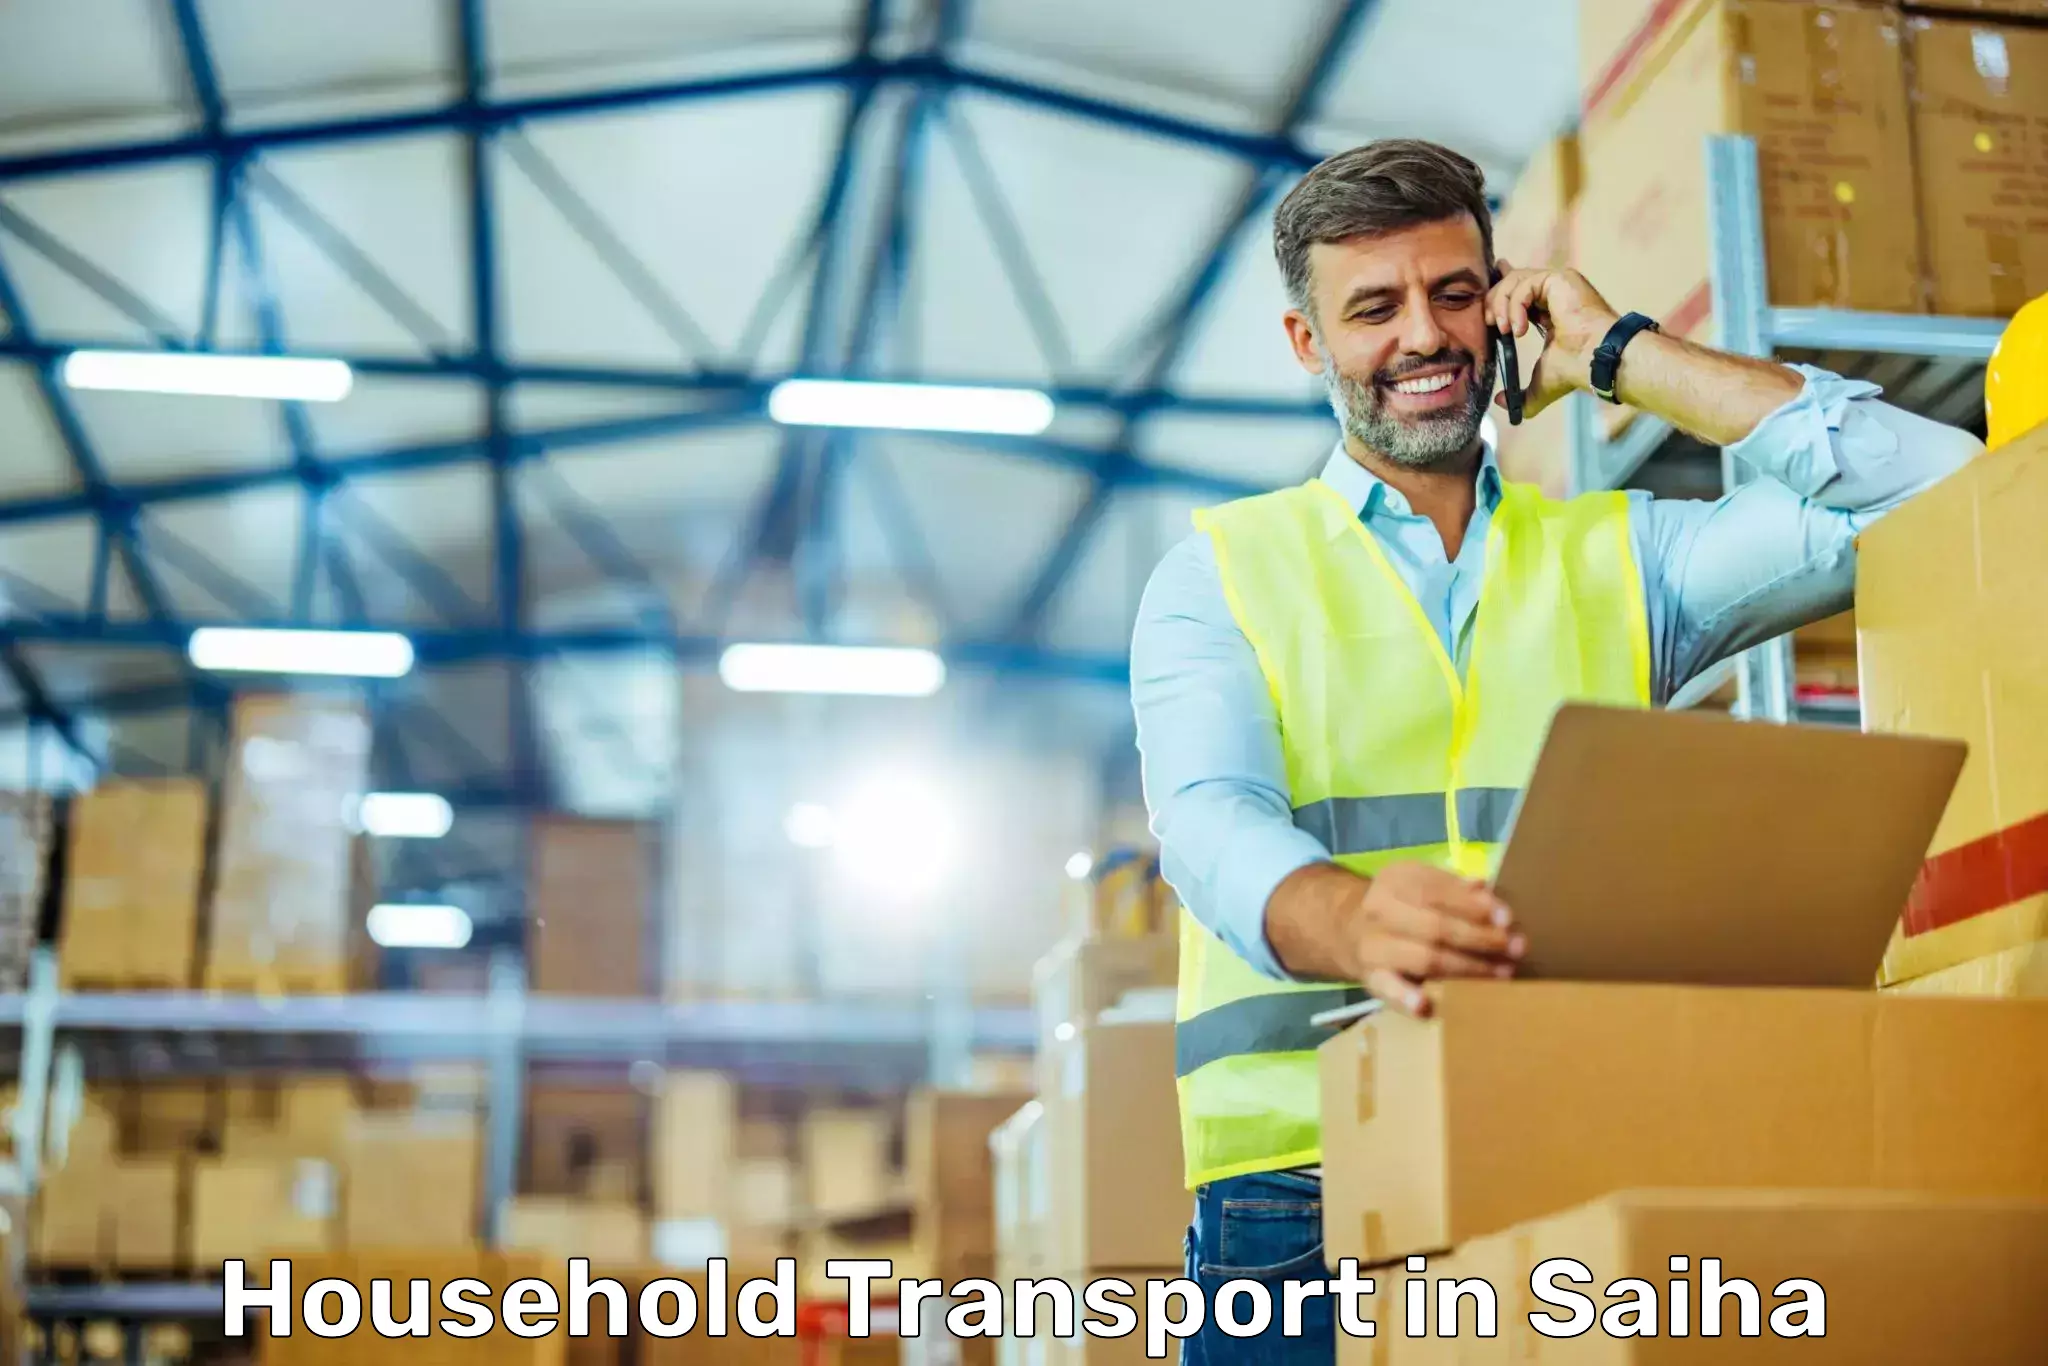 Reliable relocation services in Saiha